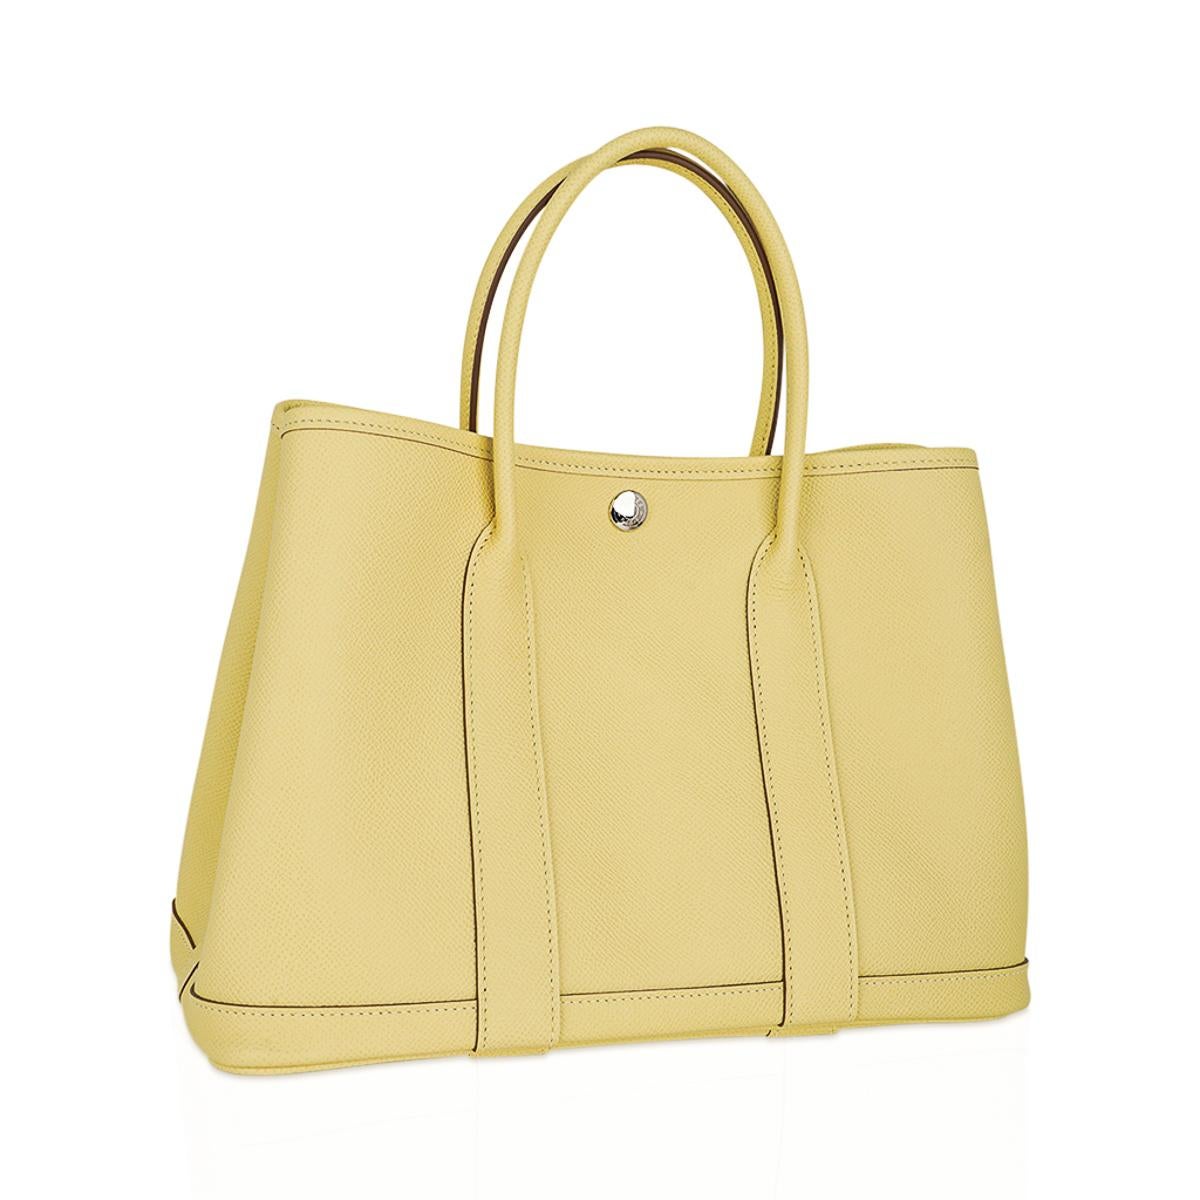 Mightychic offers an Hermes Garden Party 30 bag featured in coveted Jaune Poussin.
This sleek, simple clean lined Hermes tote bag is the perfect about town tote.
This gorgeous soft yellow bag is in Epsom leather.
Accentuated with palladium Clou de